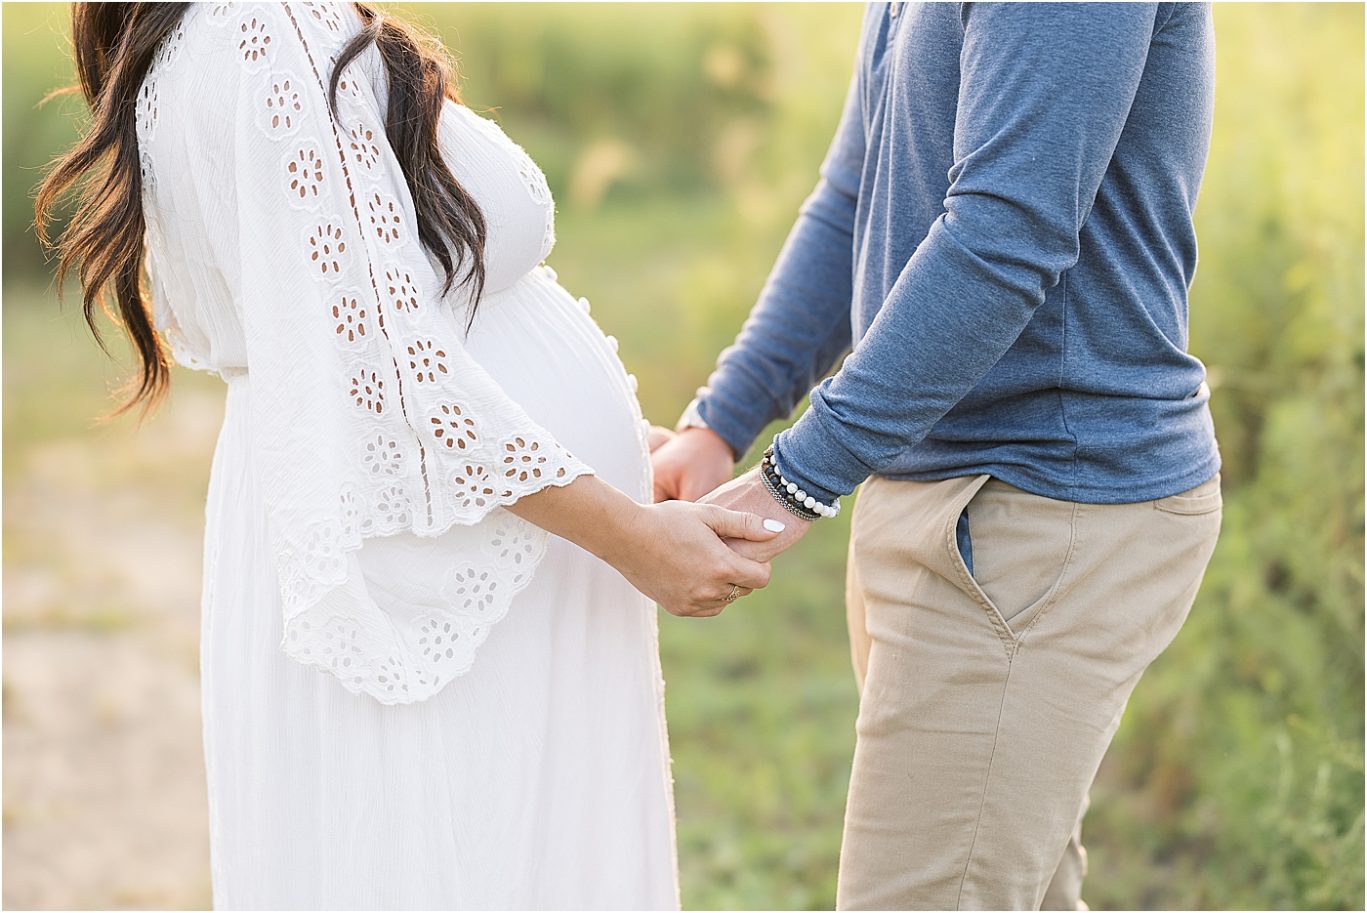 Outdoor maternity session | Photo by Lindsay Konopa Photography